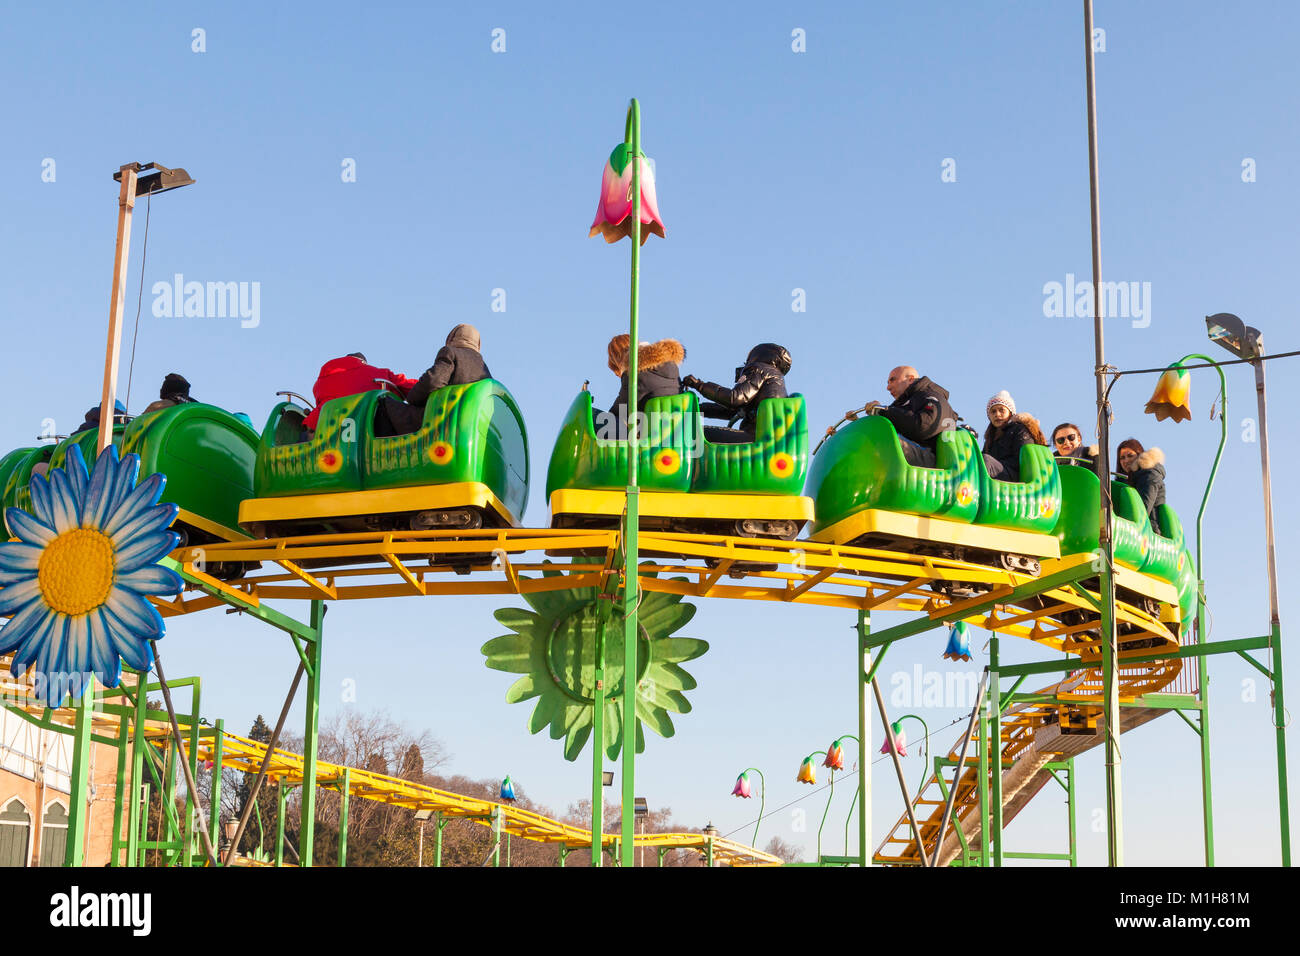 Group of young kids with their parents riding on a Wacky Worm roller coaster  in Venice, Italy against a blue sky showing the track during a seasonal w  Stock Photo - Alamy